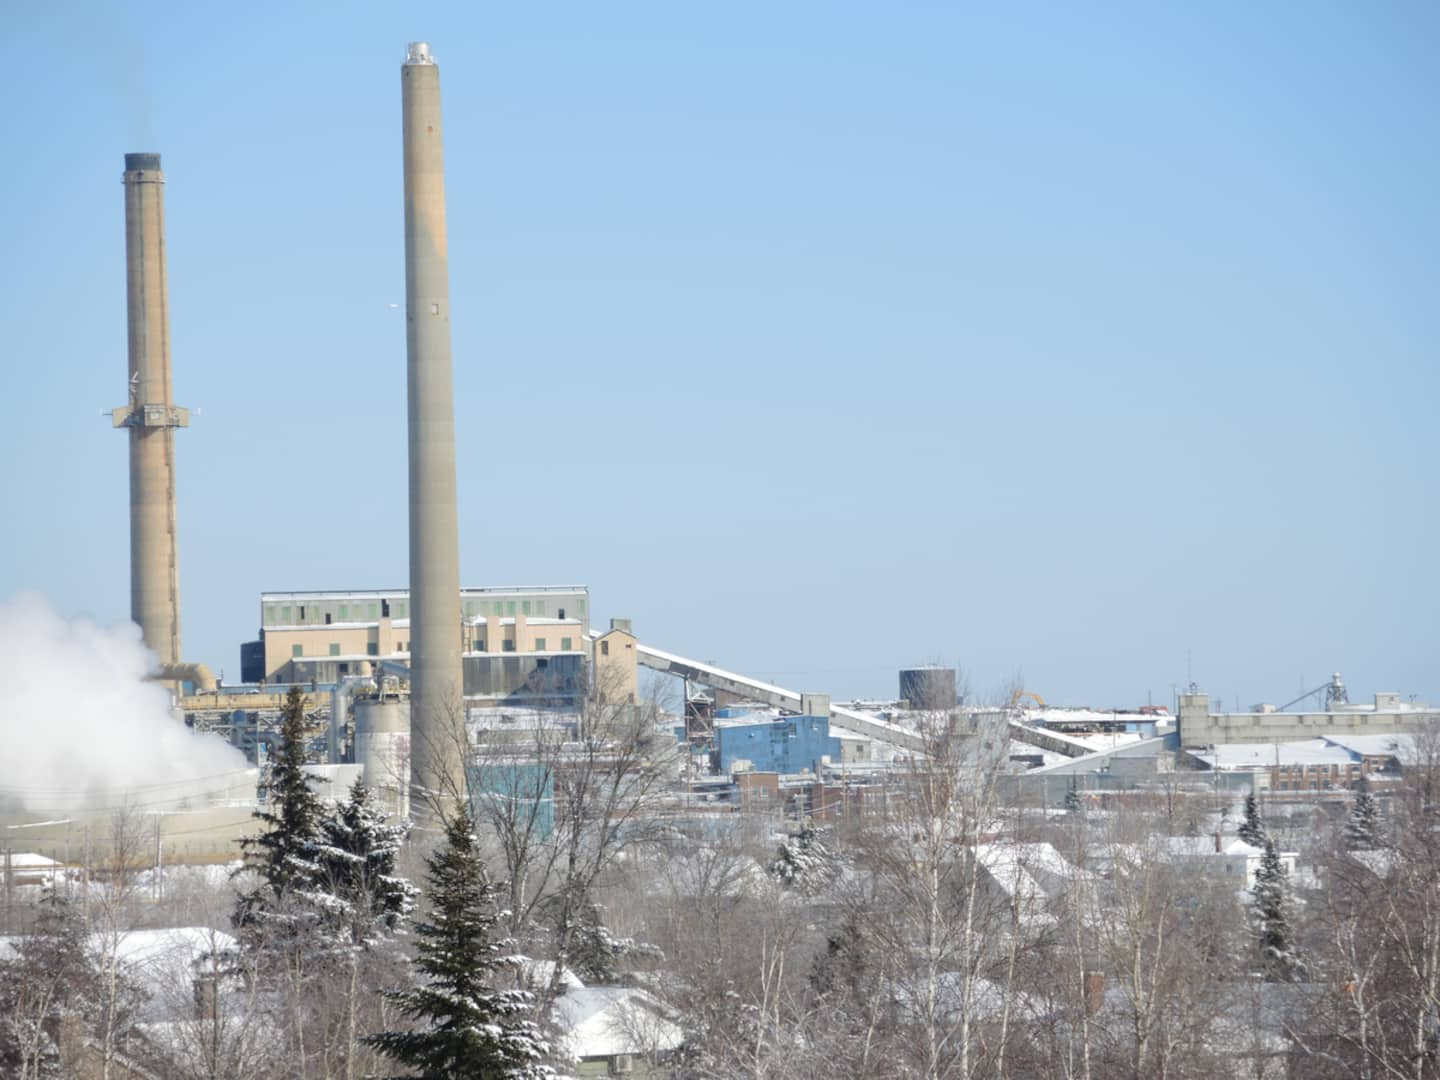 The Horne Smelter requested an arsenic emissions cap that was too high